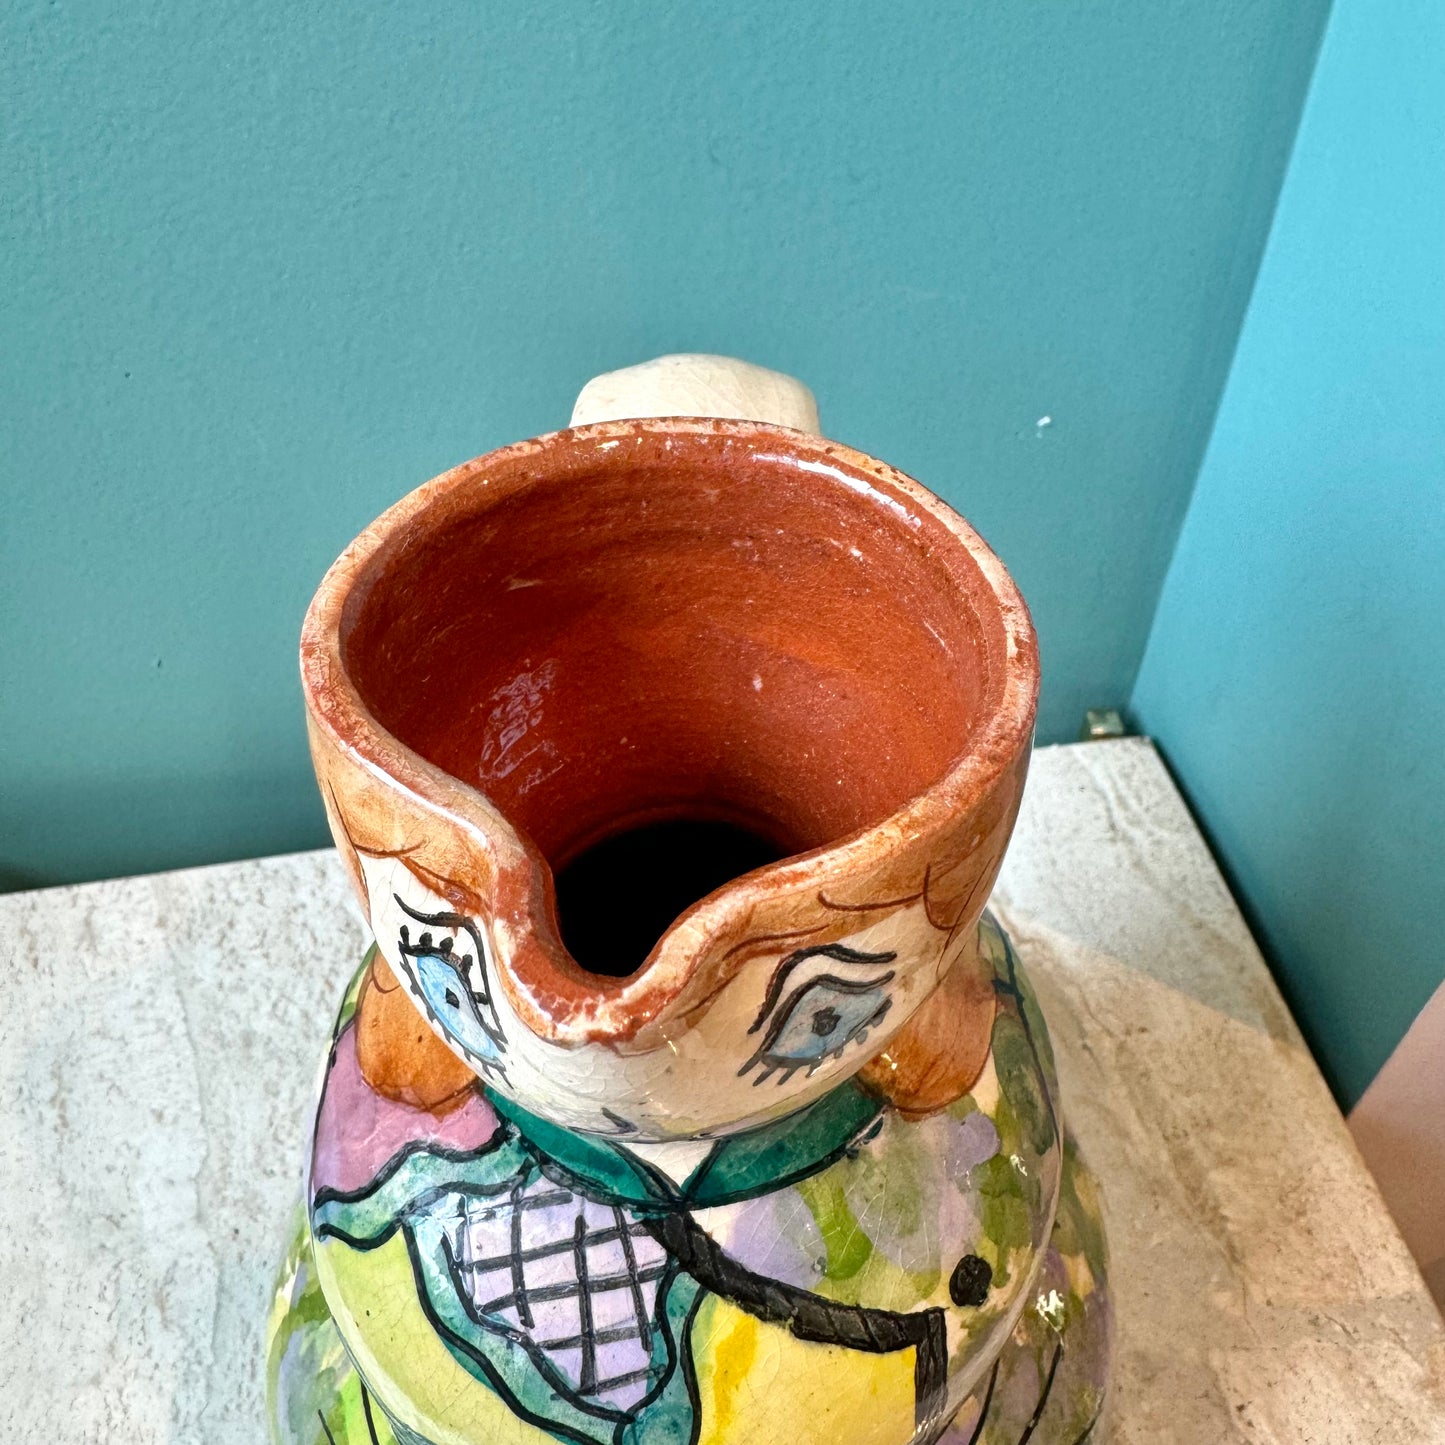 Vintage Portugal Ceramic Decorative Lady Pitcher with Hat - Signed